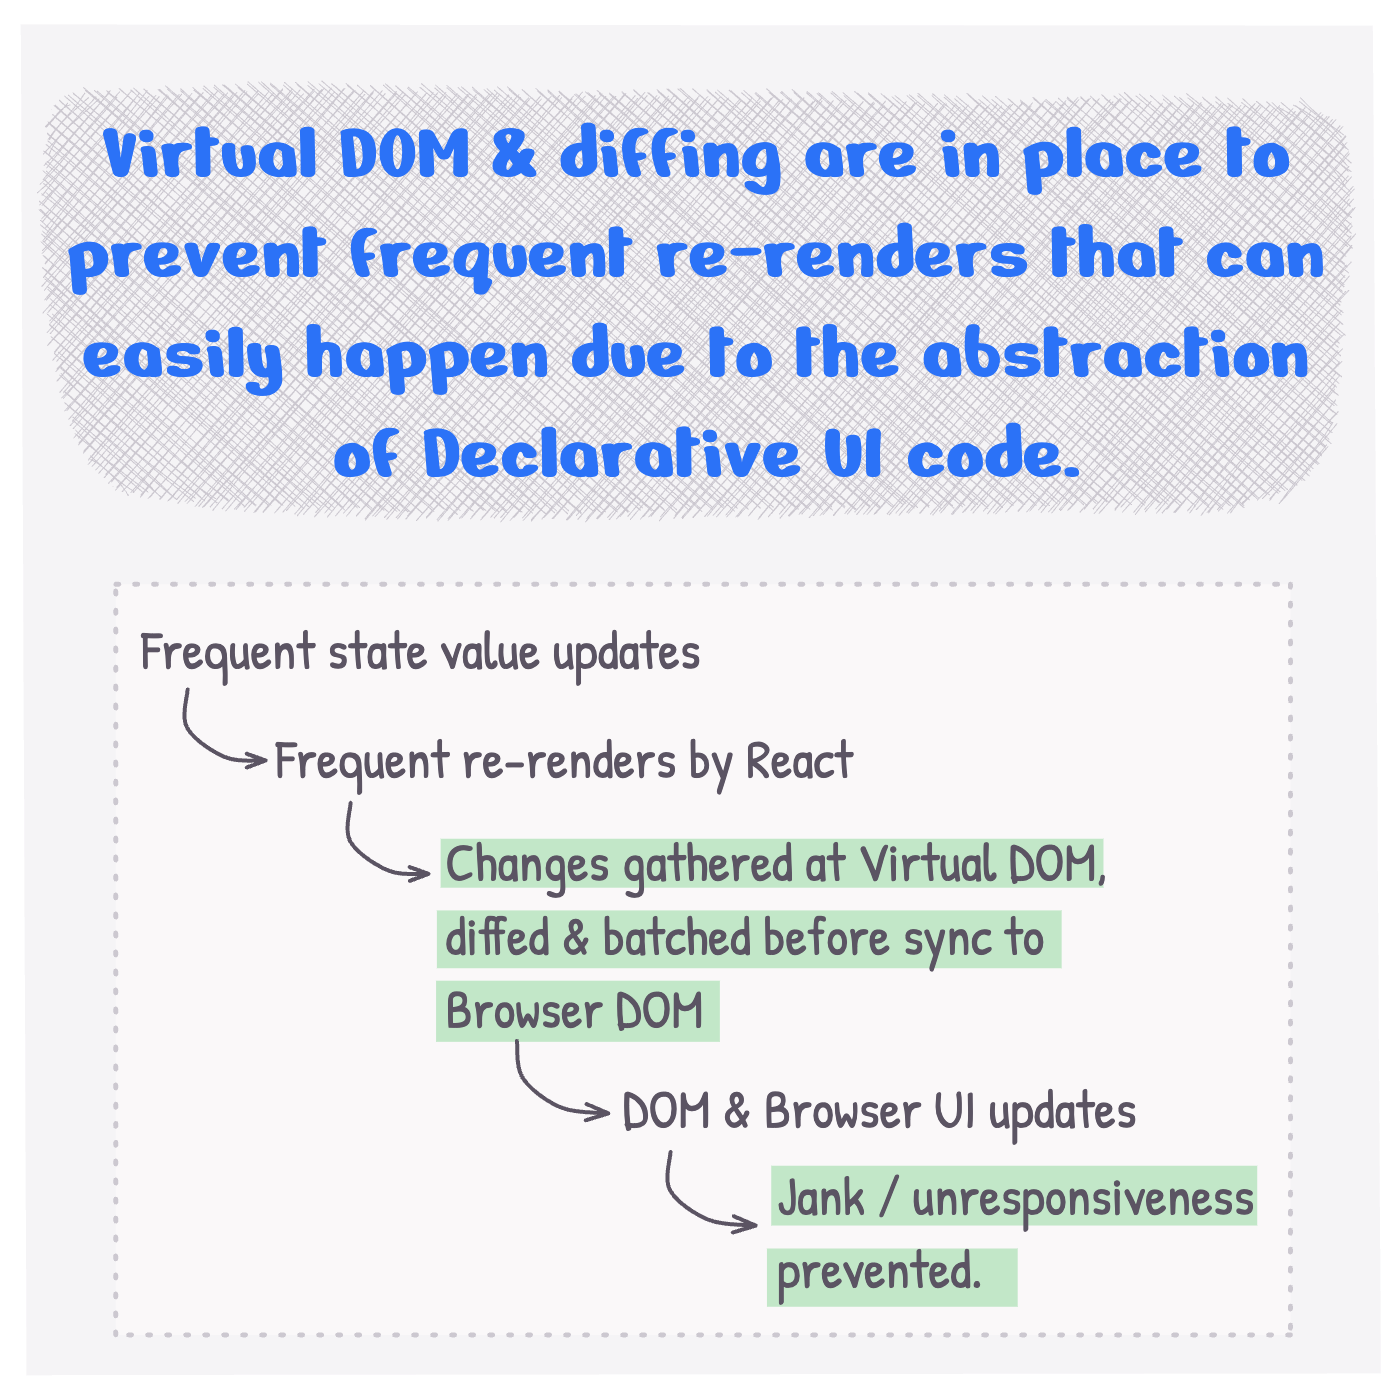 Virtual DOM & diffing are in place to prevent frequent re-renders that can easily happen due to the abstraction of Declarative UI code.